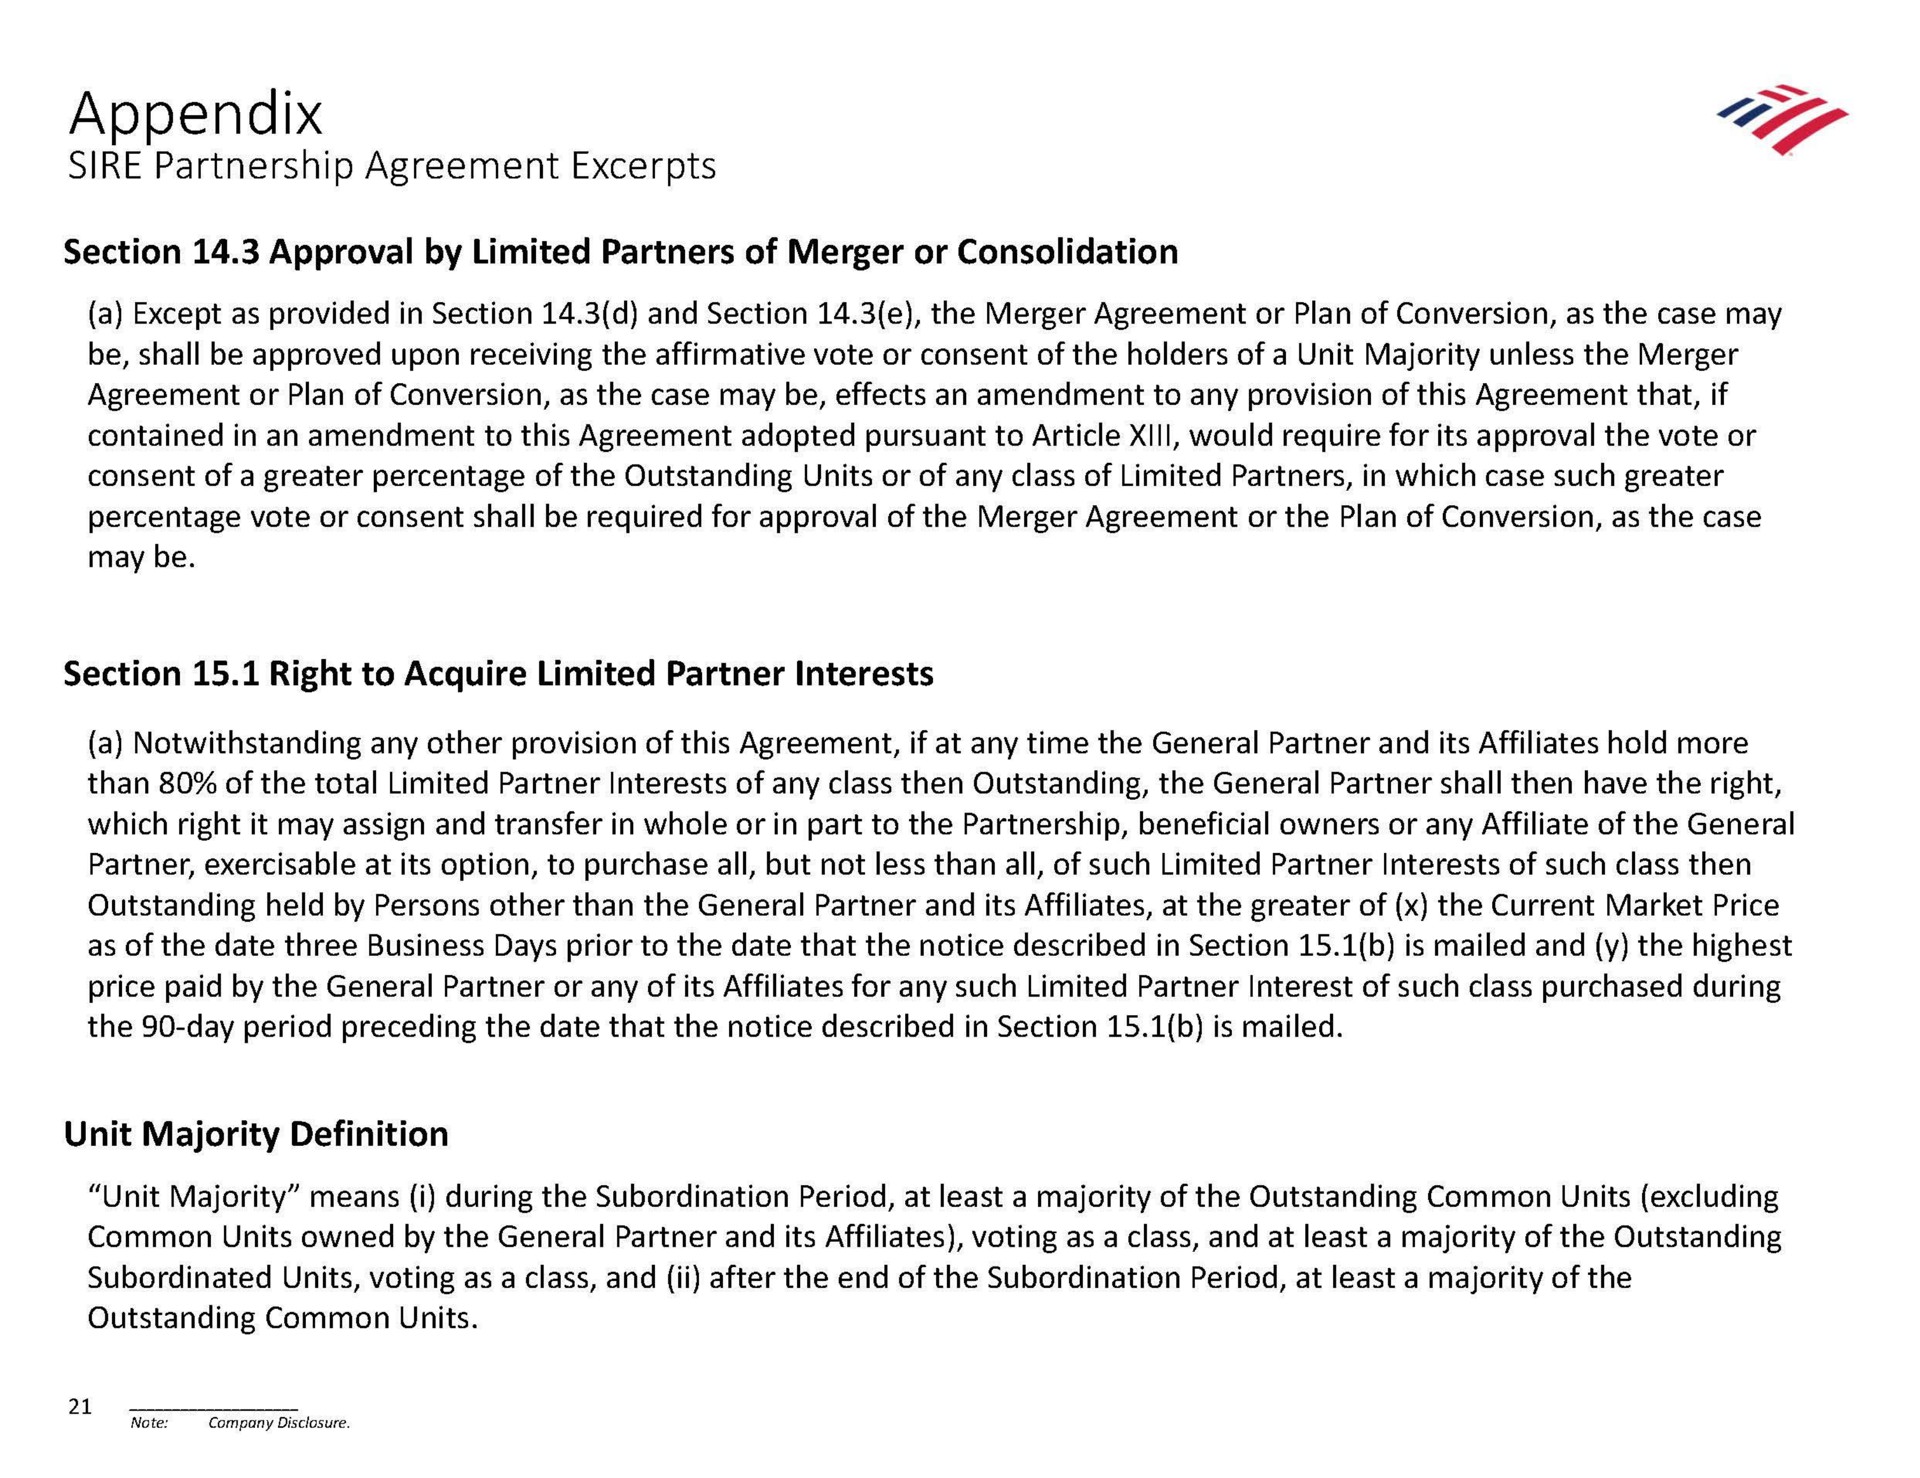 appendix sire partnership agreement excerpts section approval by limited partners of merger or consolidation agreement or plan of conversion as the case may be effects an amendment to any provision of this agreement that if section right to acquire limited partner interests which right it may assign and transfer in whole or in part to the partnership beneficial owners or any affiliate of the general as of the date three business days prior to the date that the notice described in section is mailed and the highest unit majority definition common units owned by the general partner and its affiliates voting as a class and at least a majority of the outstanding | Bank of America